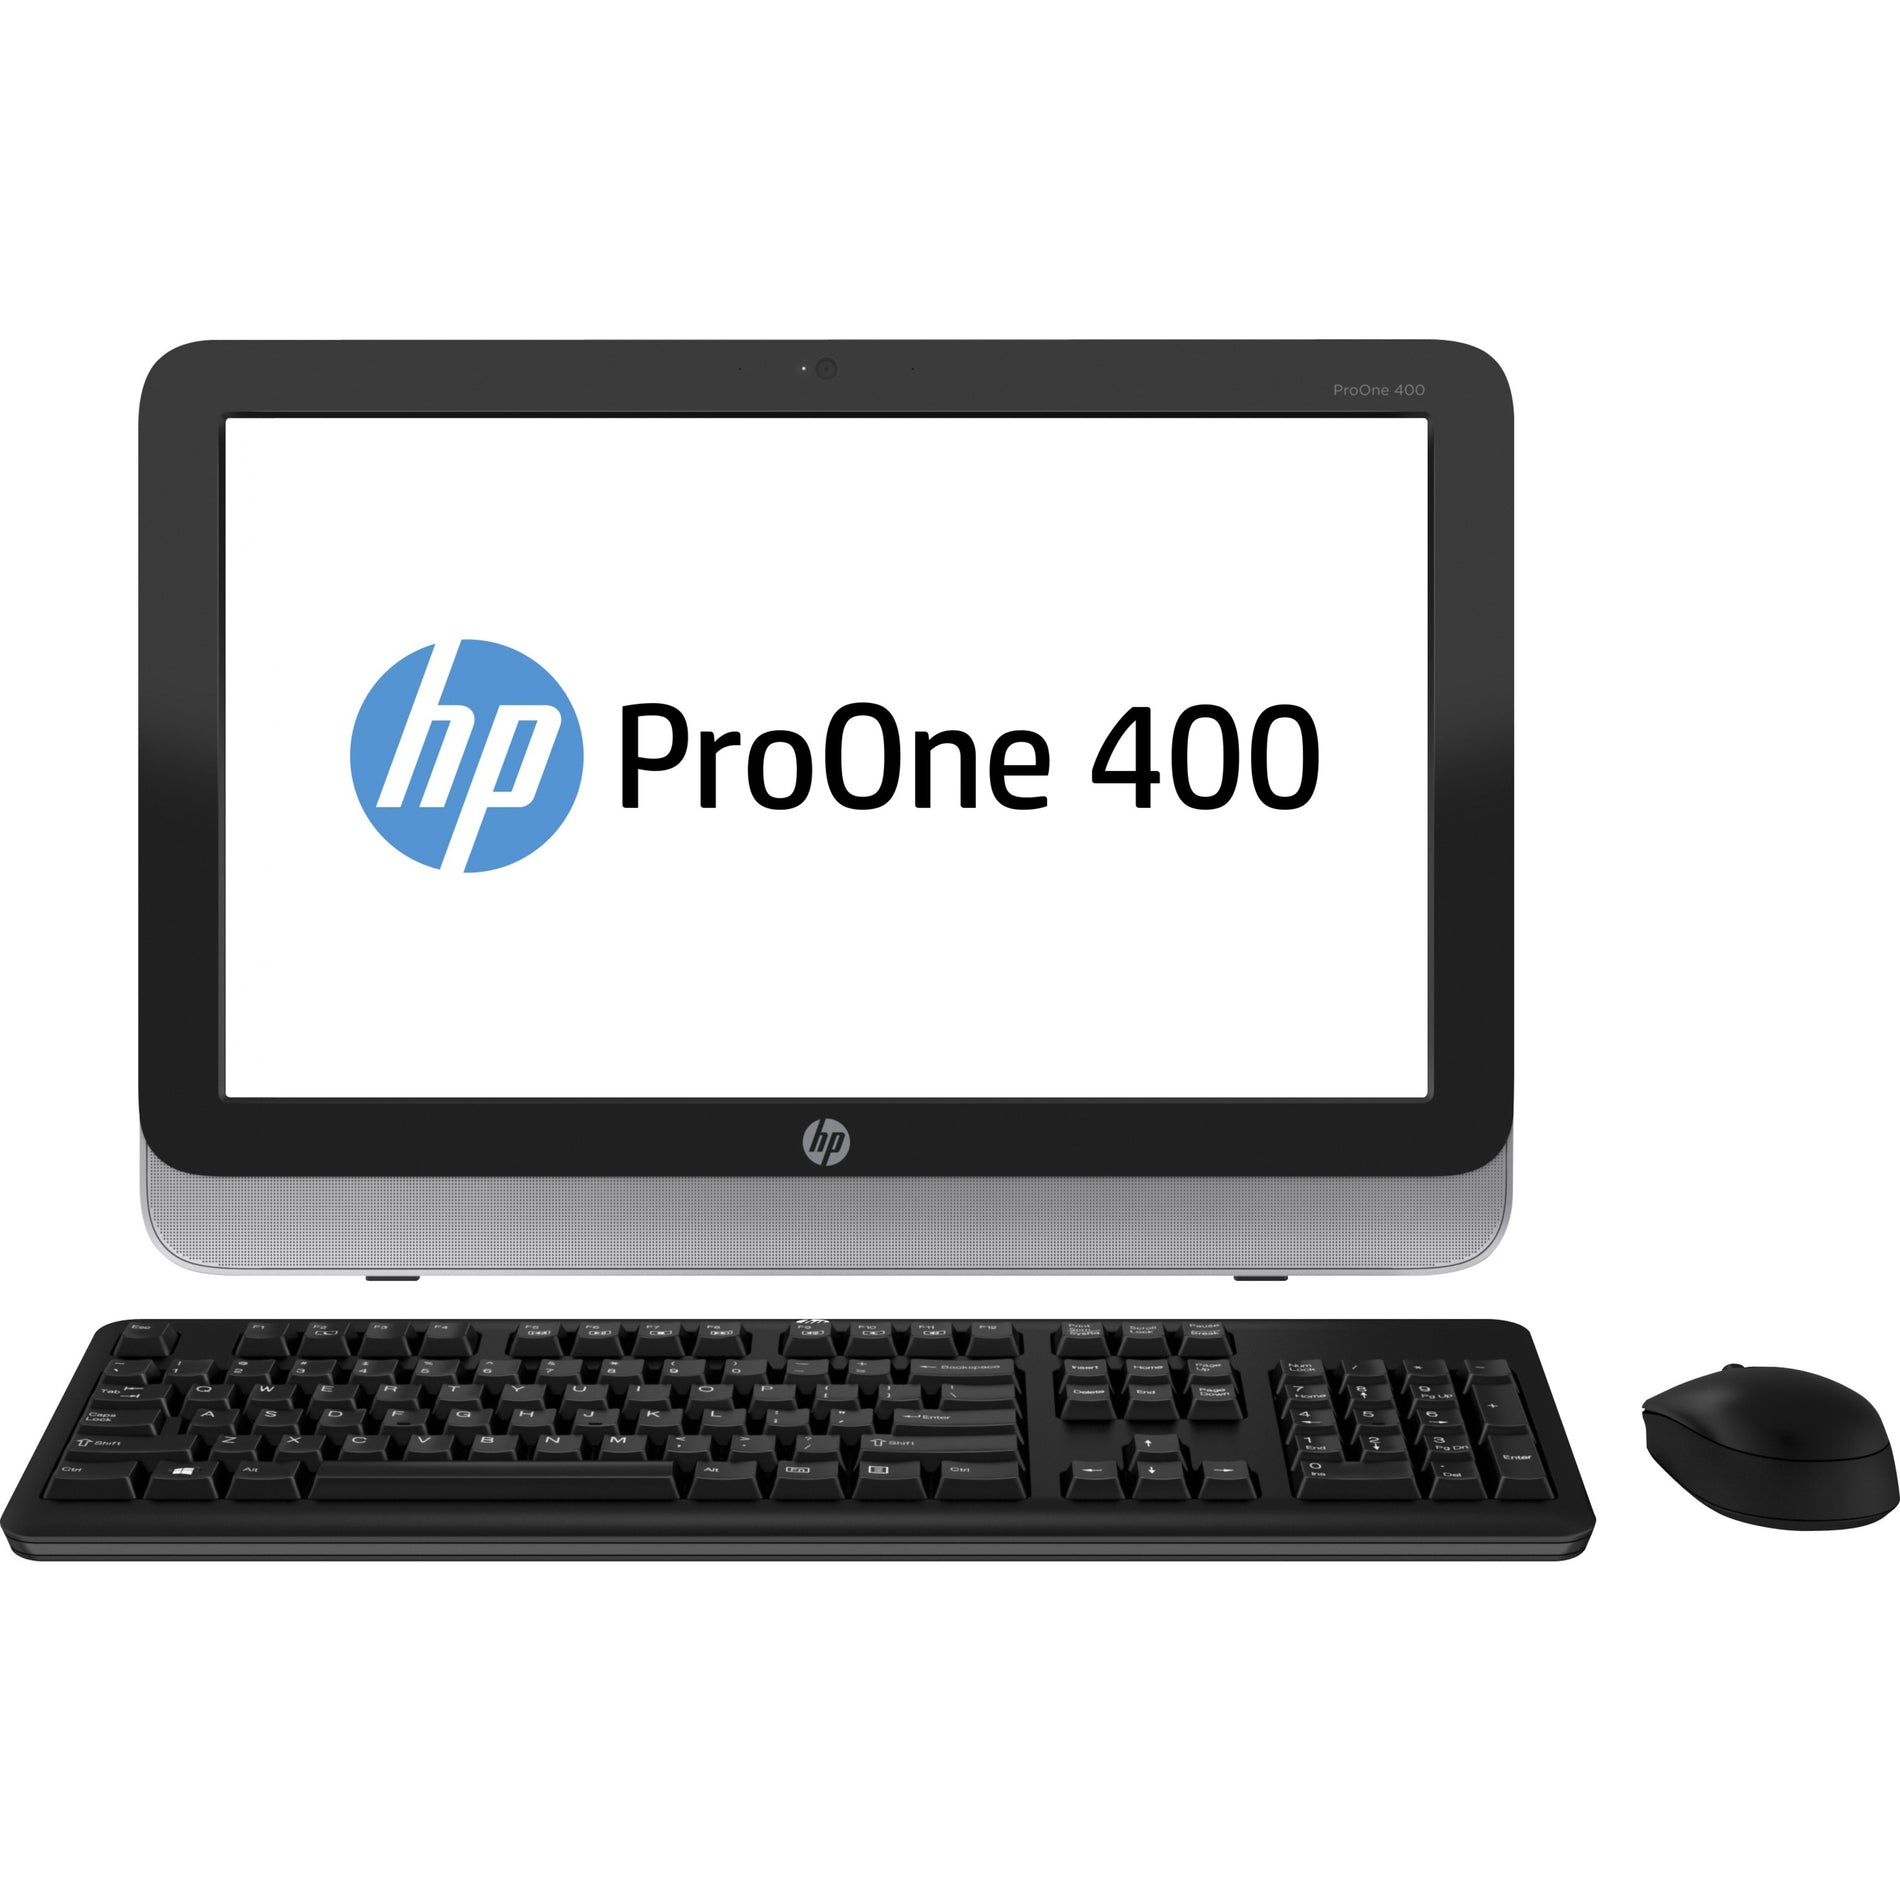 HP ProOne 400 G1 19.5-inch Non-Touch All-in-One PC, Windows 7 Professional, 4GB RAM, 500GB HDD